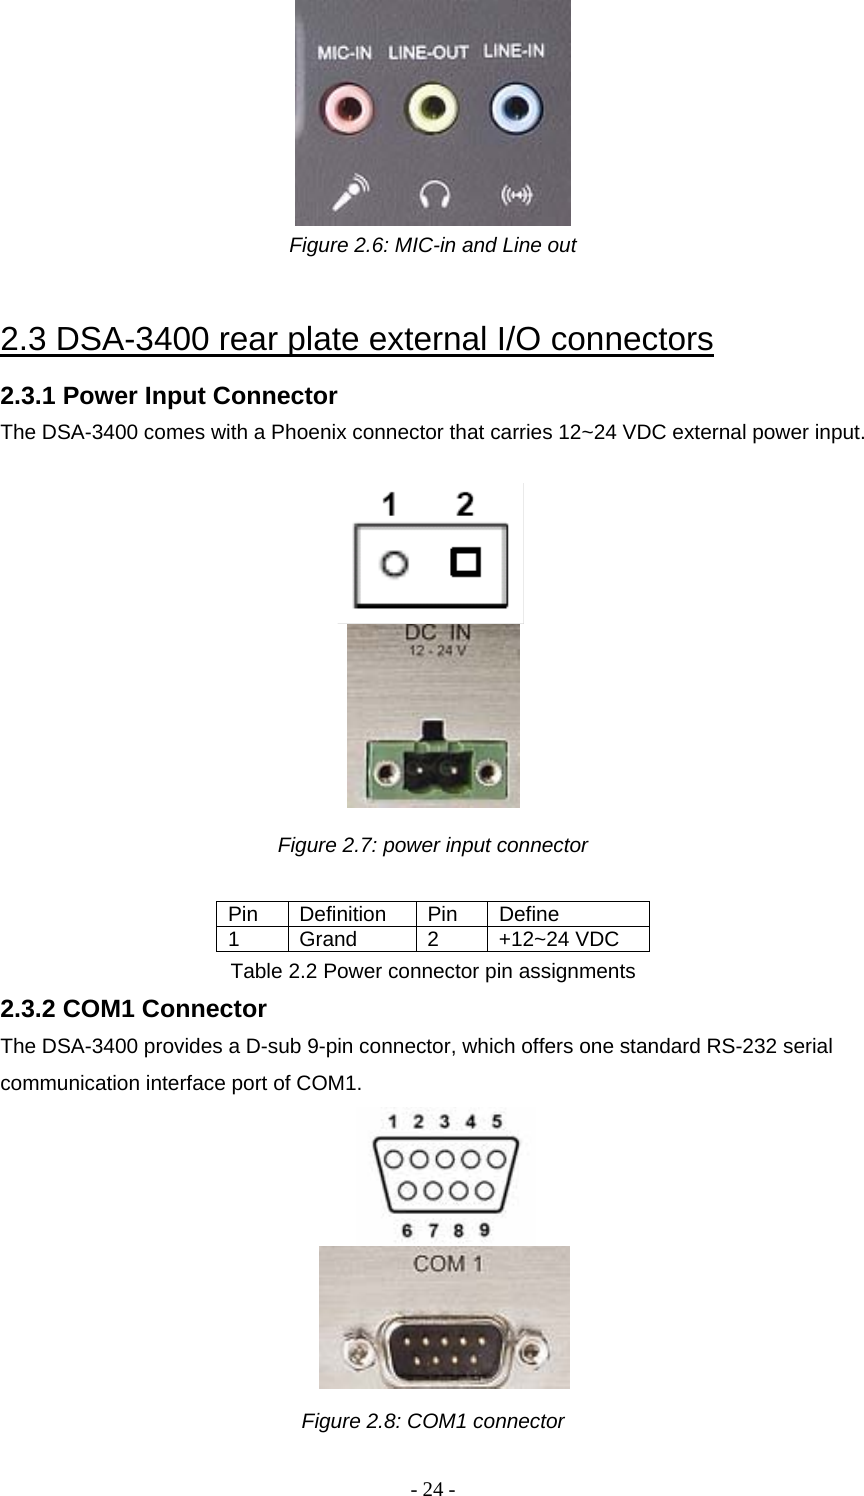 - 24 -  Figure 2.6: MIC-in and Line out   2.3 DSA-3400 rear plate external I/O connectors  2.3.1 Power Input Connector  The DSA-3400 comes with a Phoenix connector that carries 12~24 VDC external power input.       Figure 2.7: power input connector  Pin Definition Pin Define 1 Grand  2 +12~24 VDC Table 2.2 Power connector pin assignments 2.3.2 COM1 Connector  The DSA-3400 provides a D-sub 9-pin connector, which offers one standard RS-232 serial communication interface port of COM1.          Figure 2.8: COM1 connector 